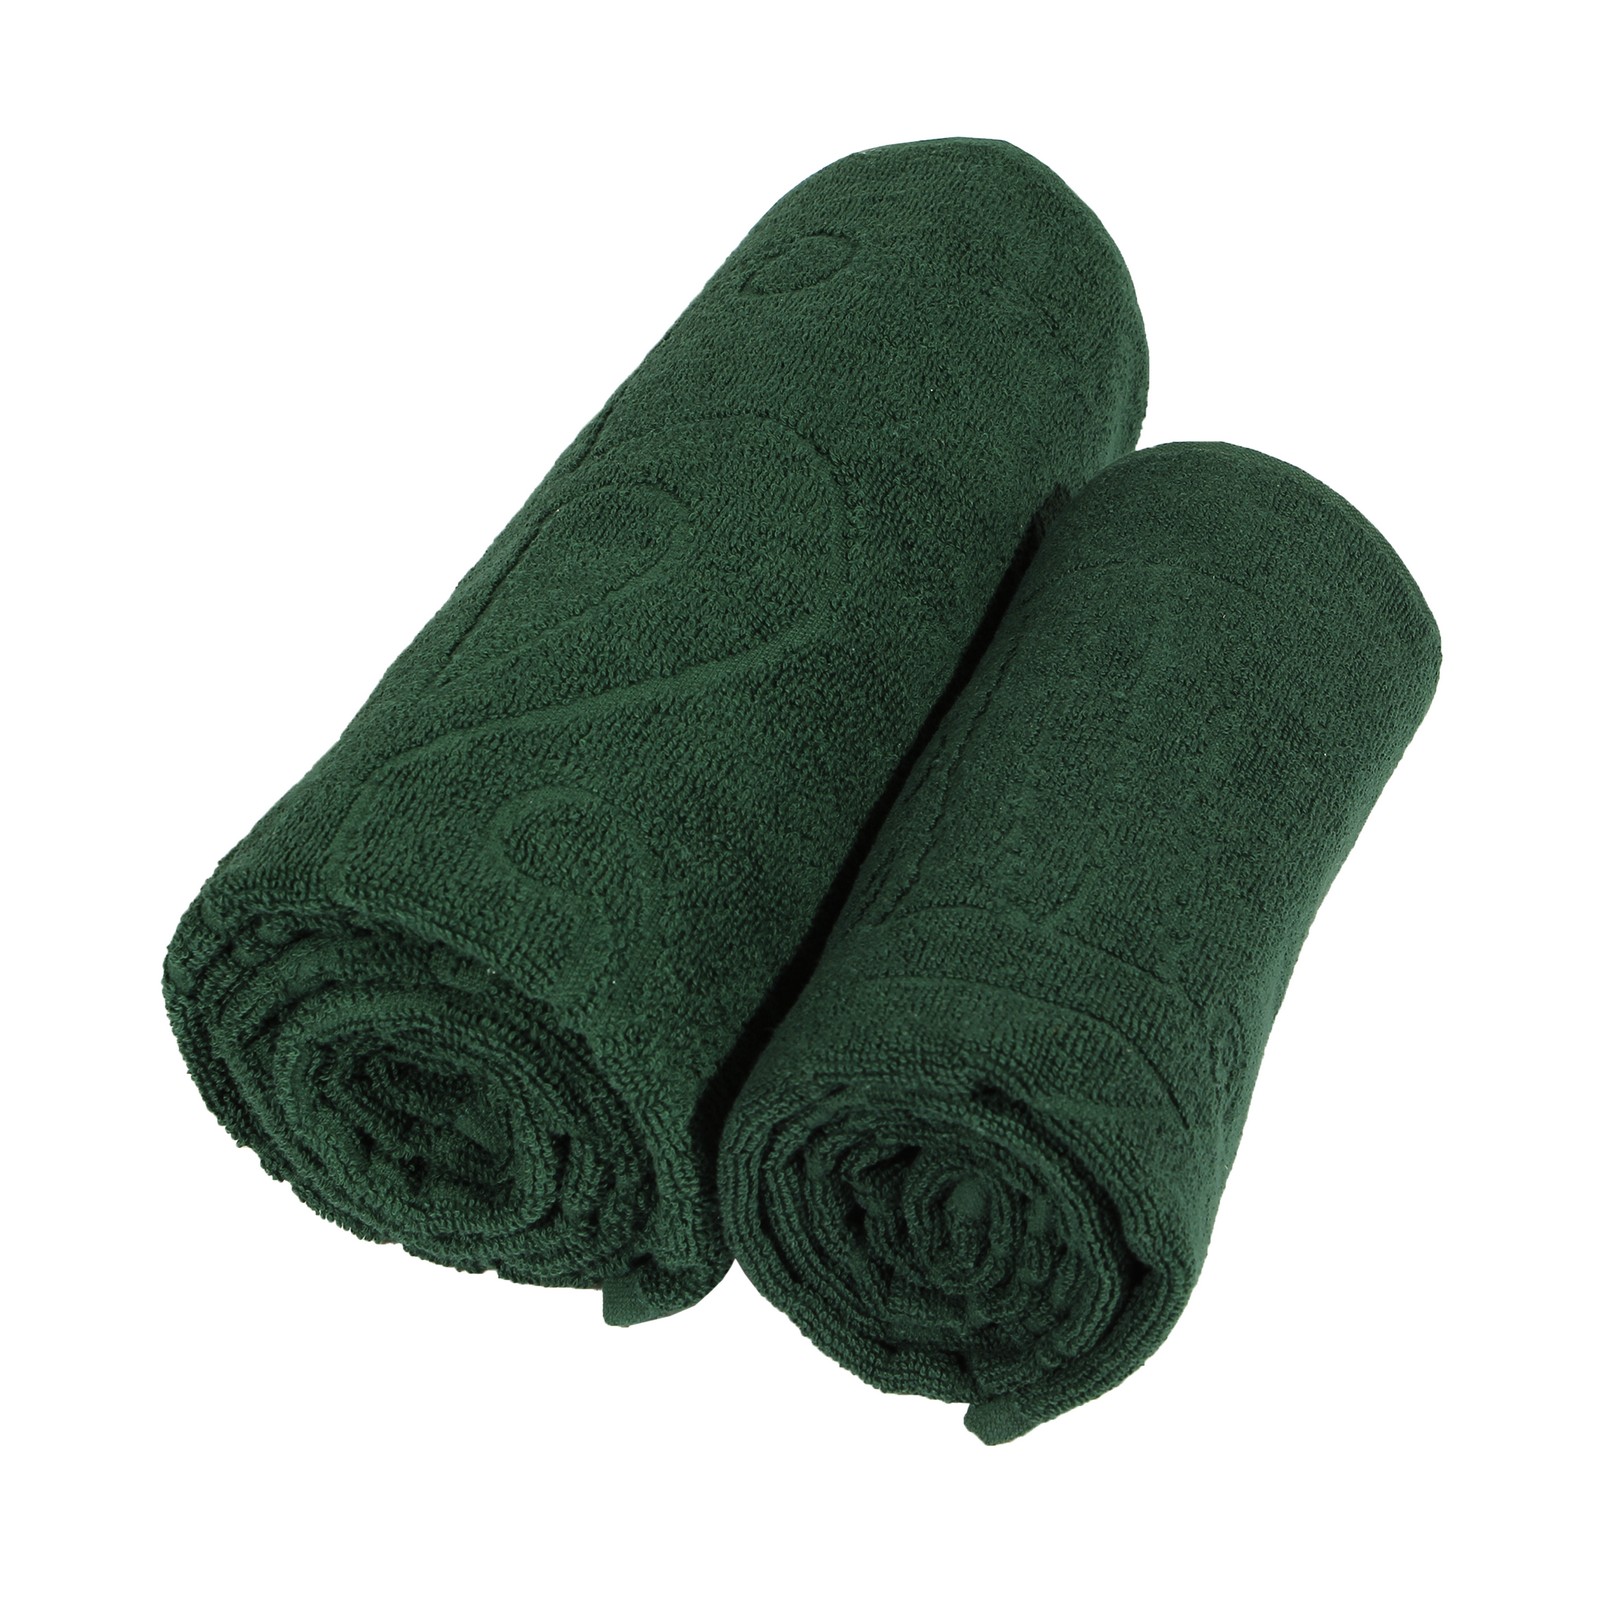 Pilsner Urquell Hand and Bath Towels